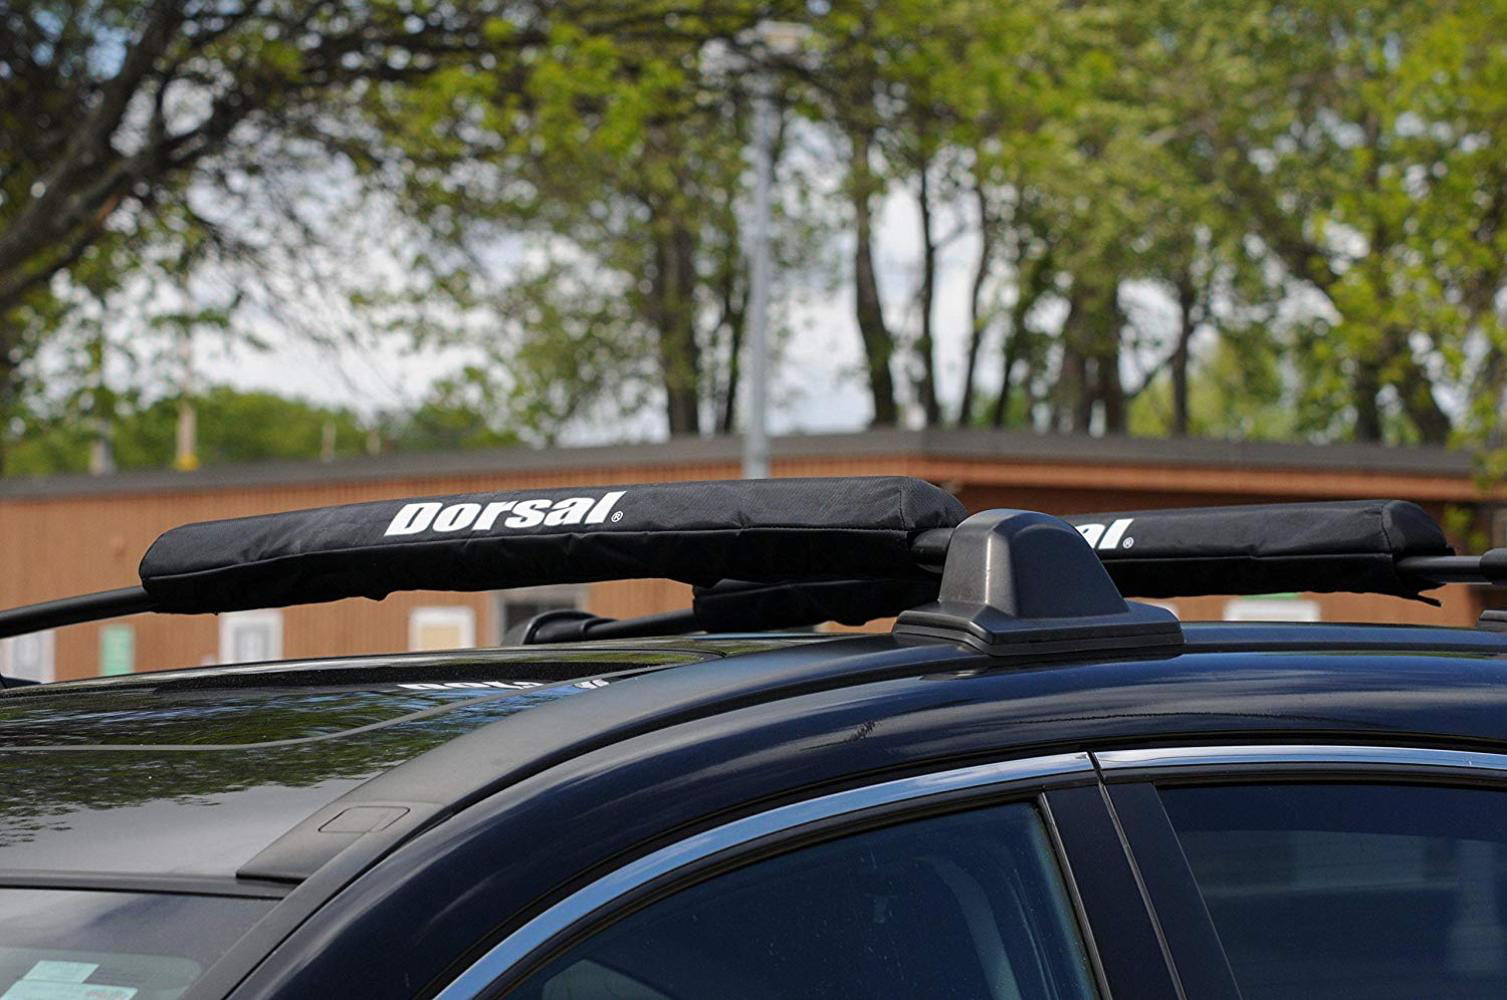 28 INCH CAR ROOF Rack Crossbar Pads SURF Board SUP Snowboard Protection 